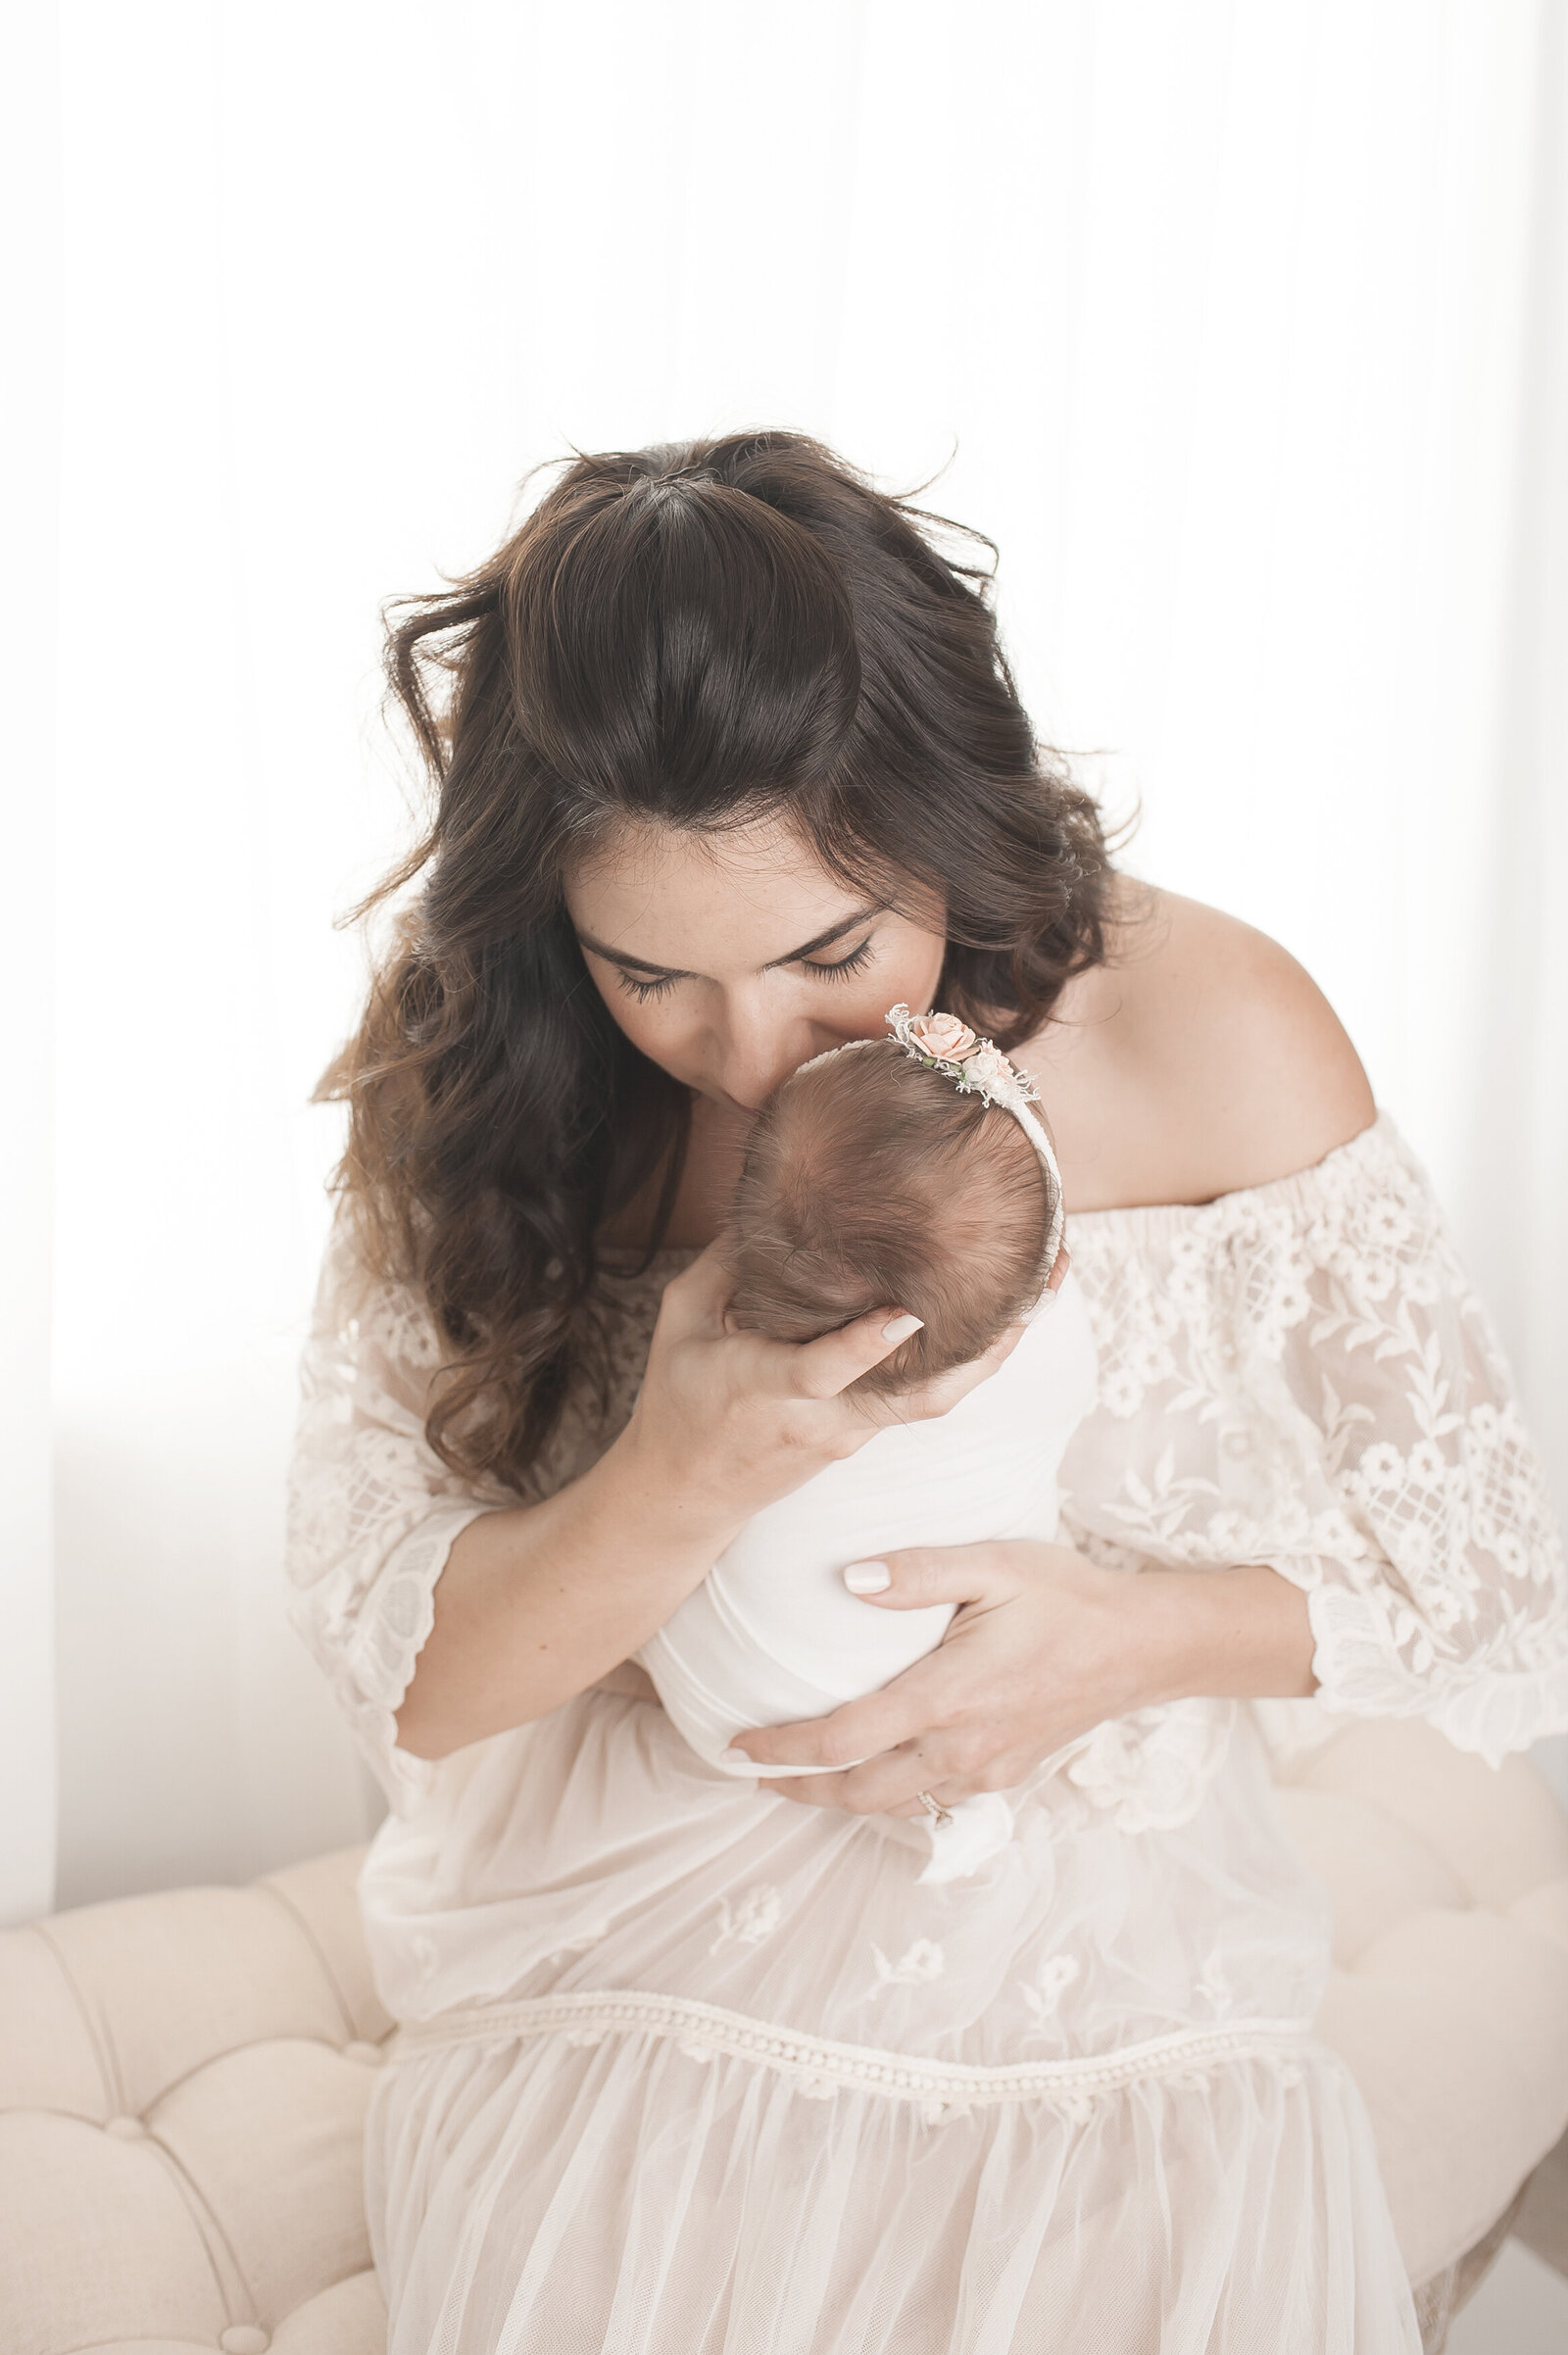 Mother in lace dress hugging newborn baby